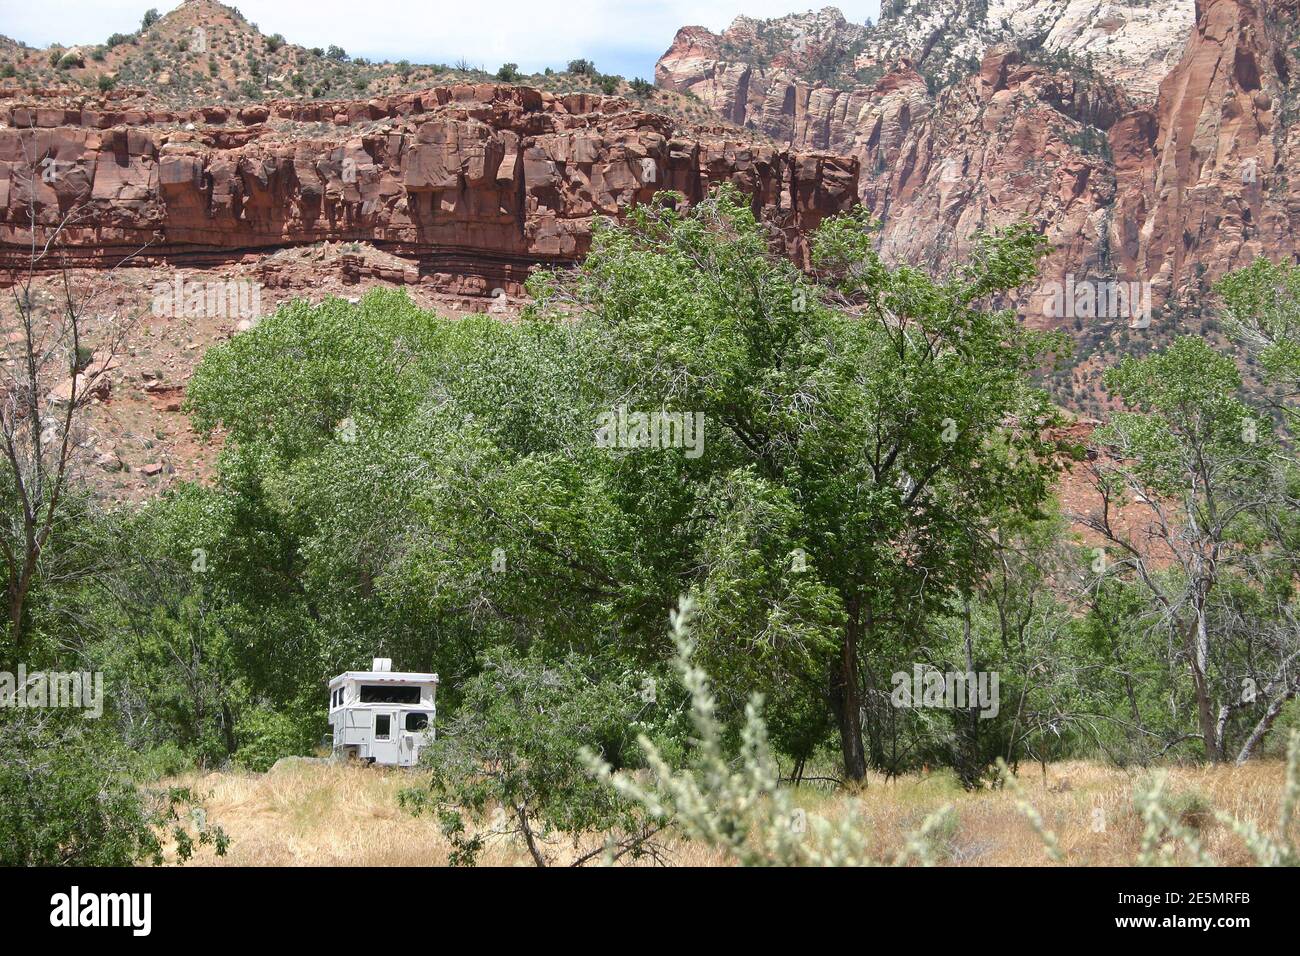 Zion National Park, Utah, USA, wilderness camping at its finest! Stock Photo